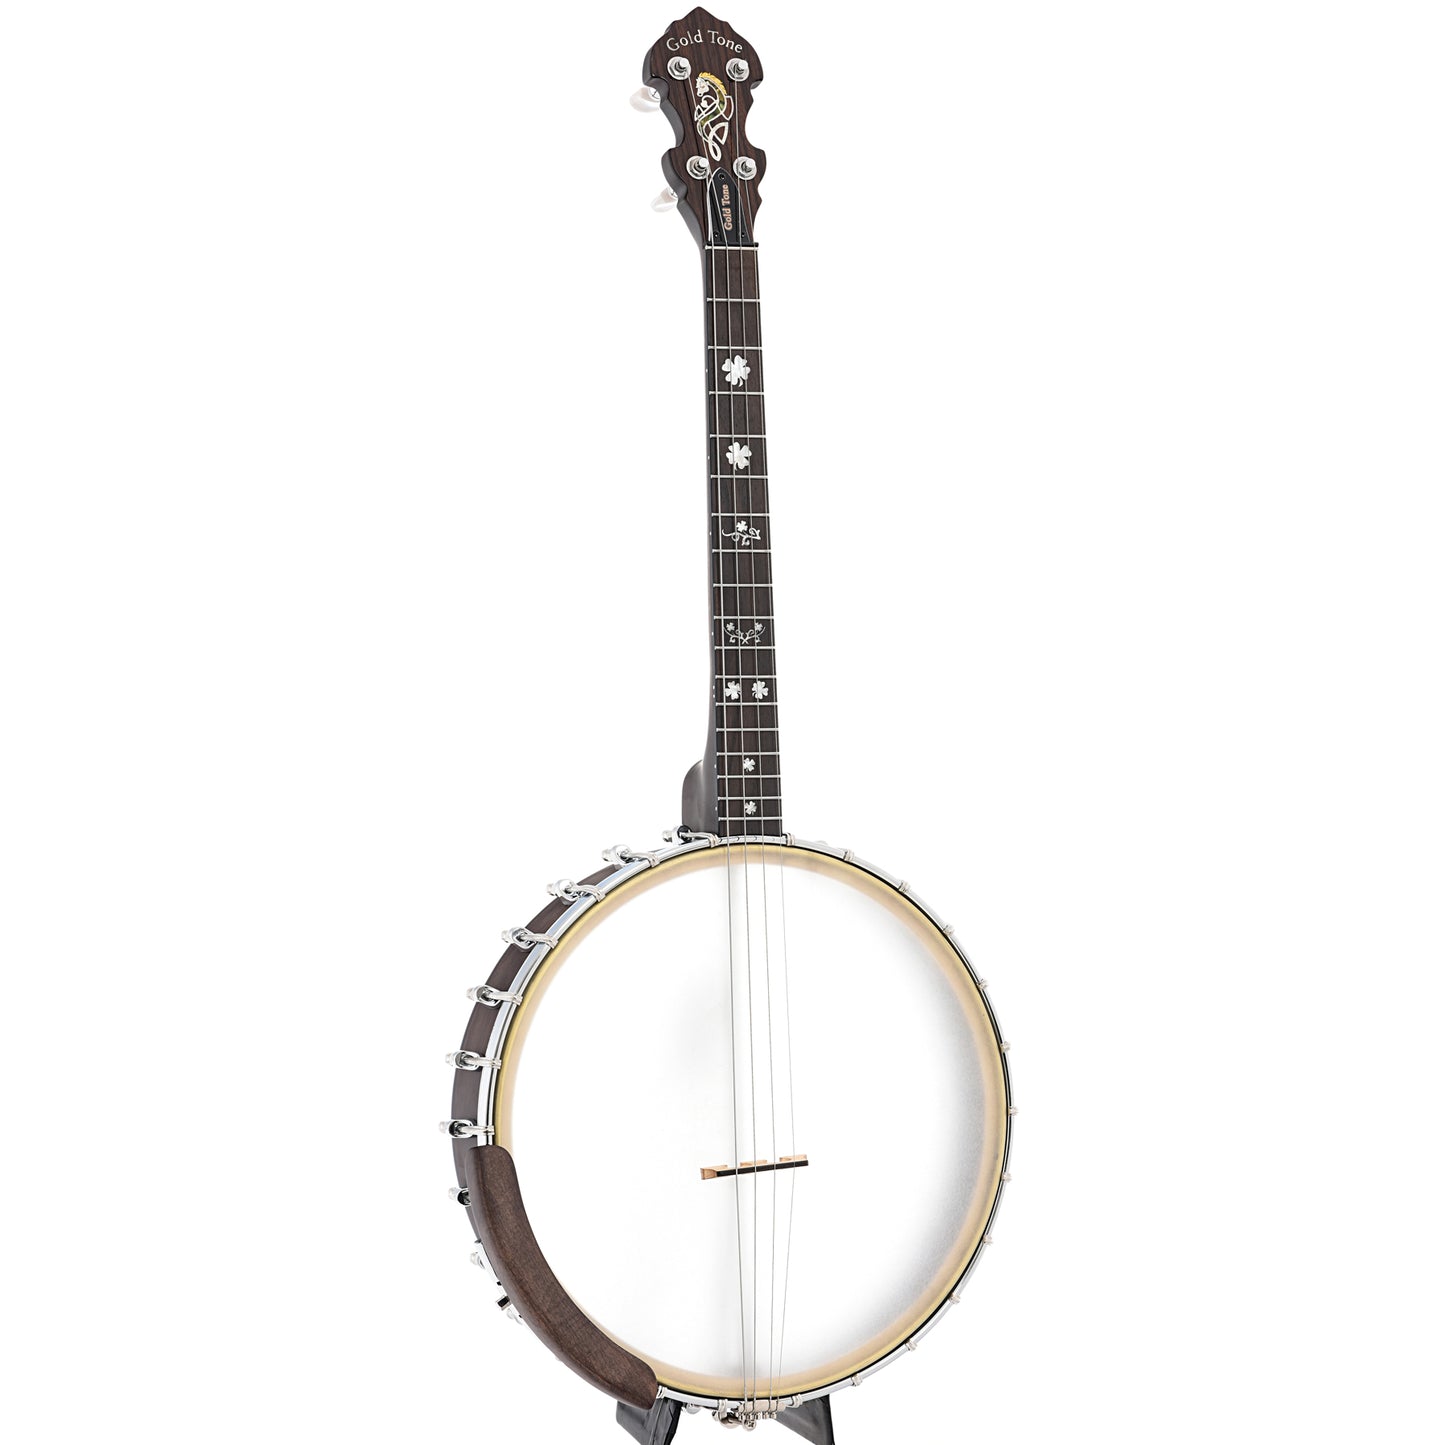 Full front and side of Gold Tone MB-850+ Mando-Banjo